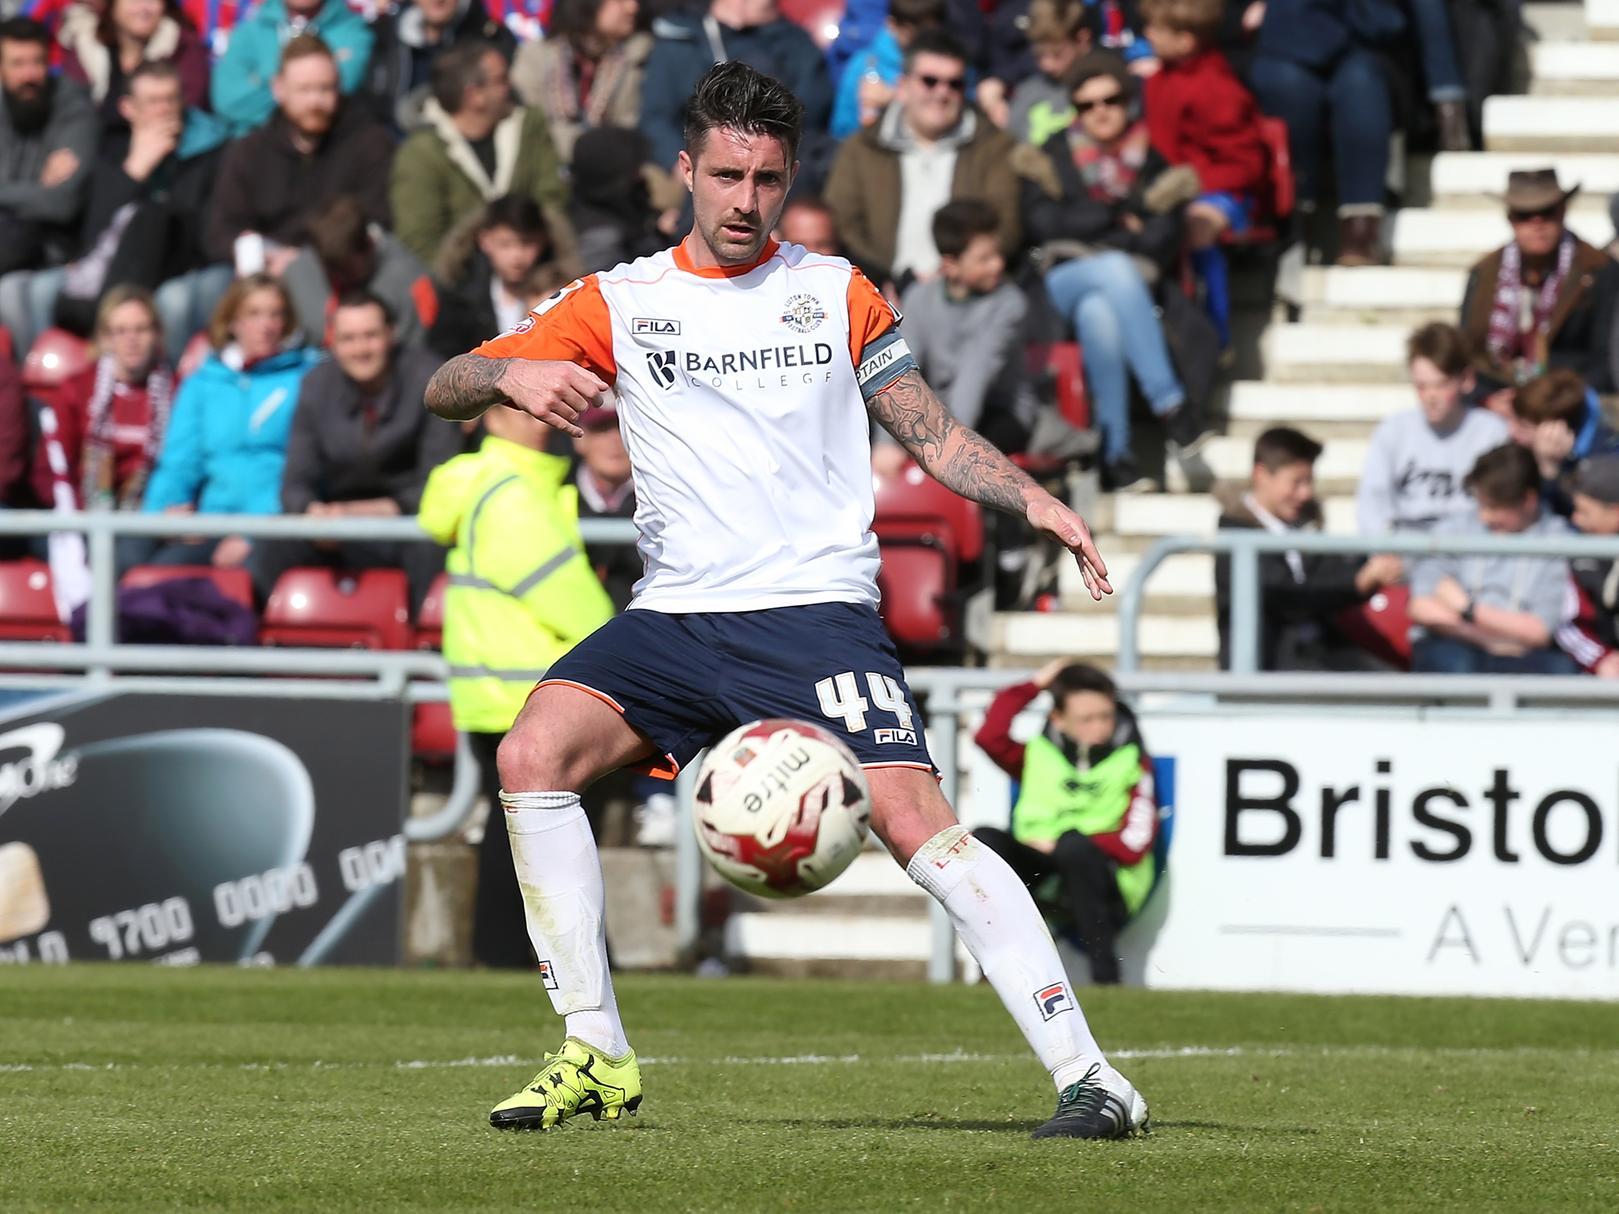 Released by Luton Town on deadline day, Sheehan has a wealth of League One experience and helped the Hatters to promotion last season. His set-piece delivery can prove a vital weapon.